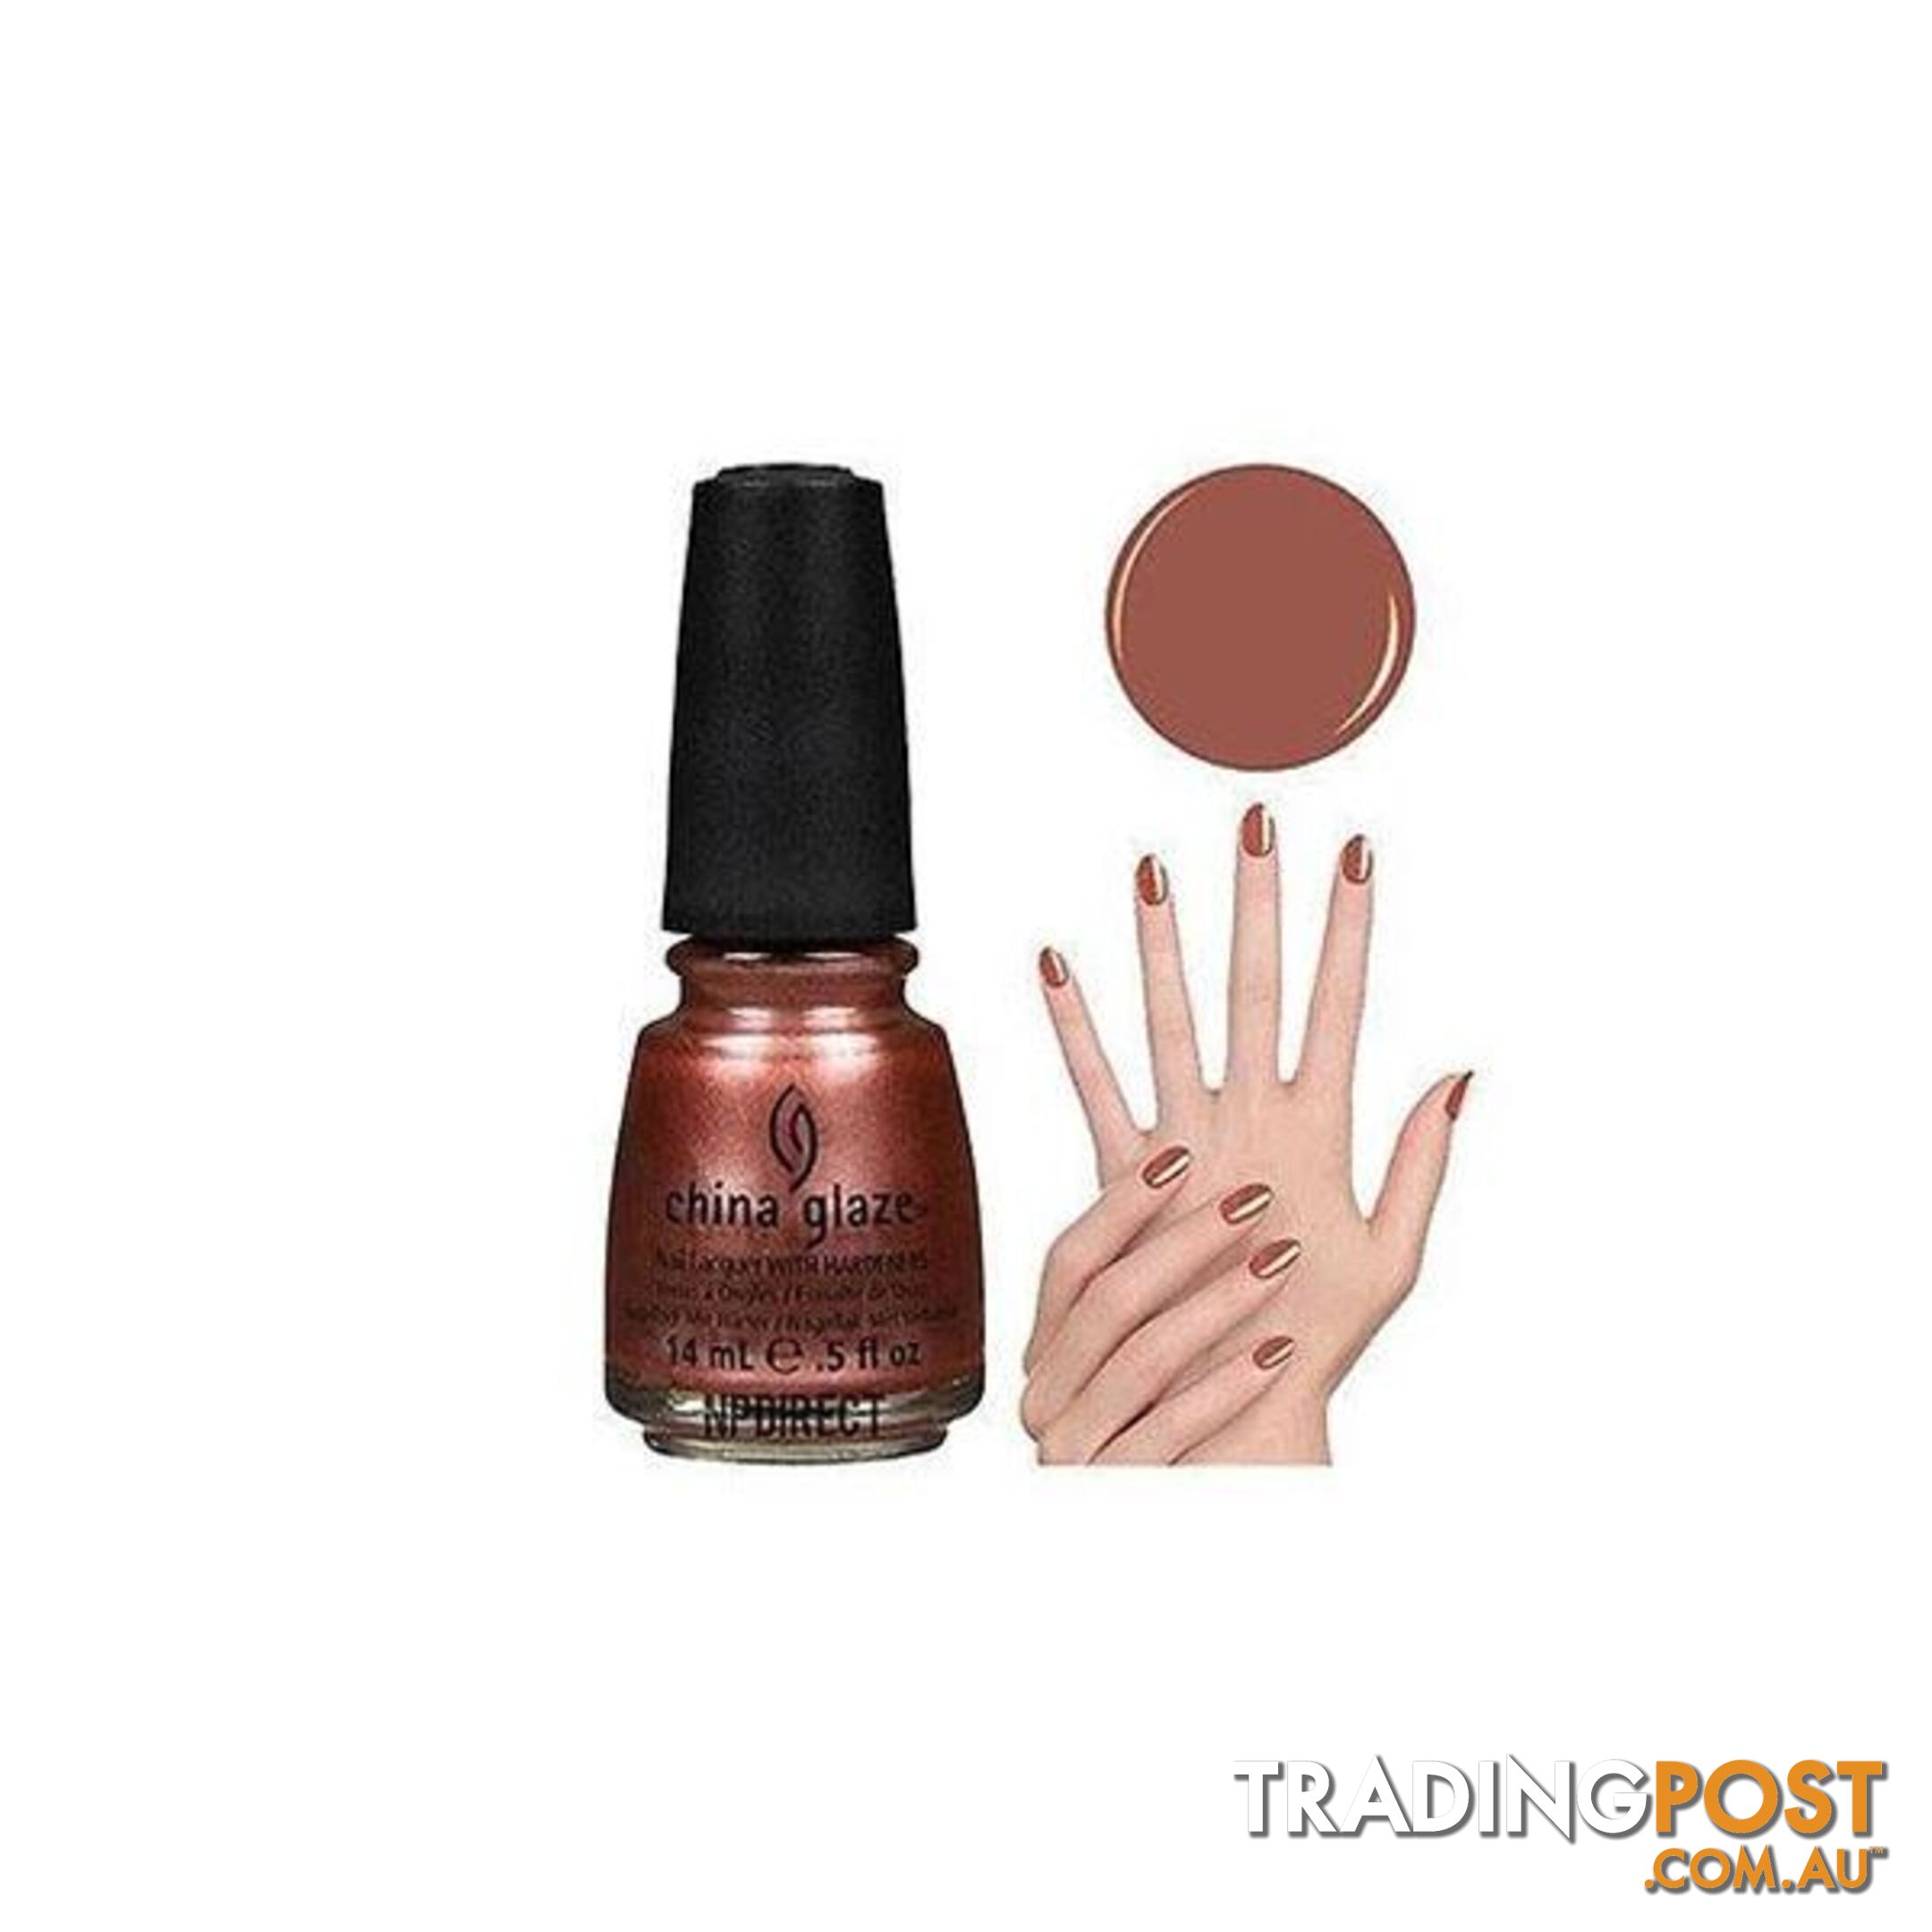 China Glaze Nail Lacquer - Unbranded - 4326500379740